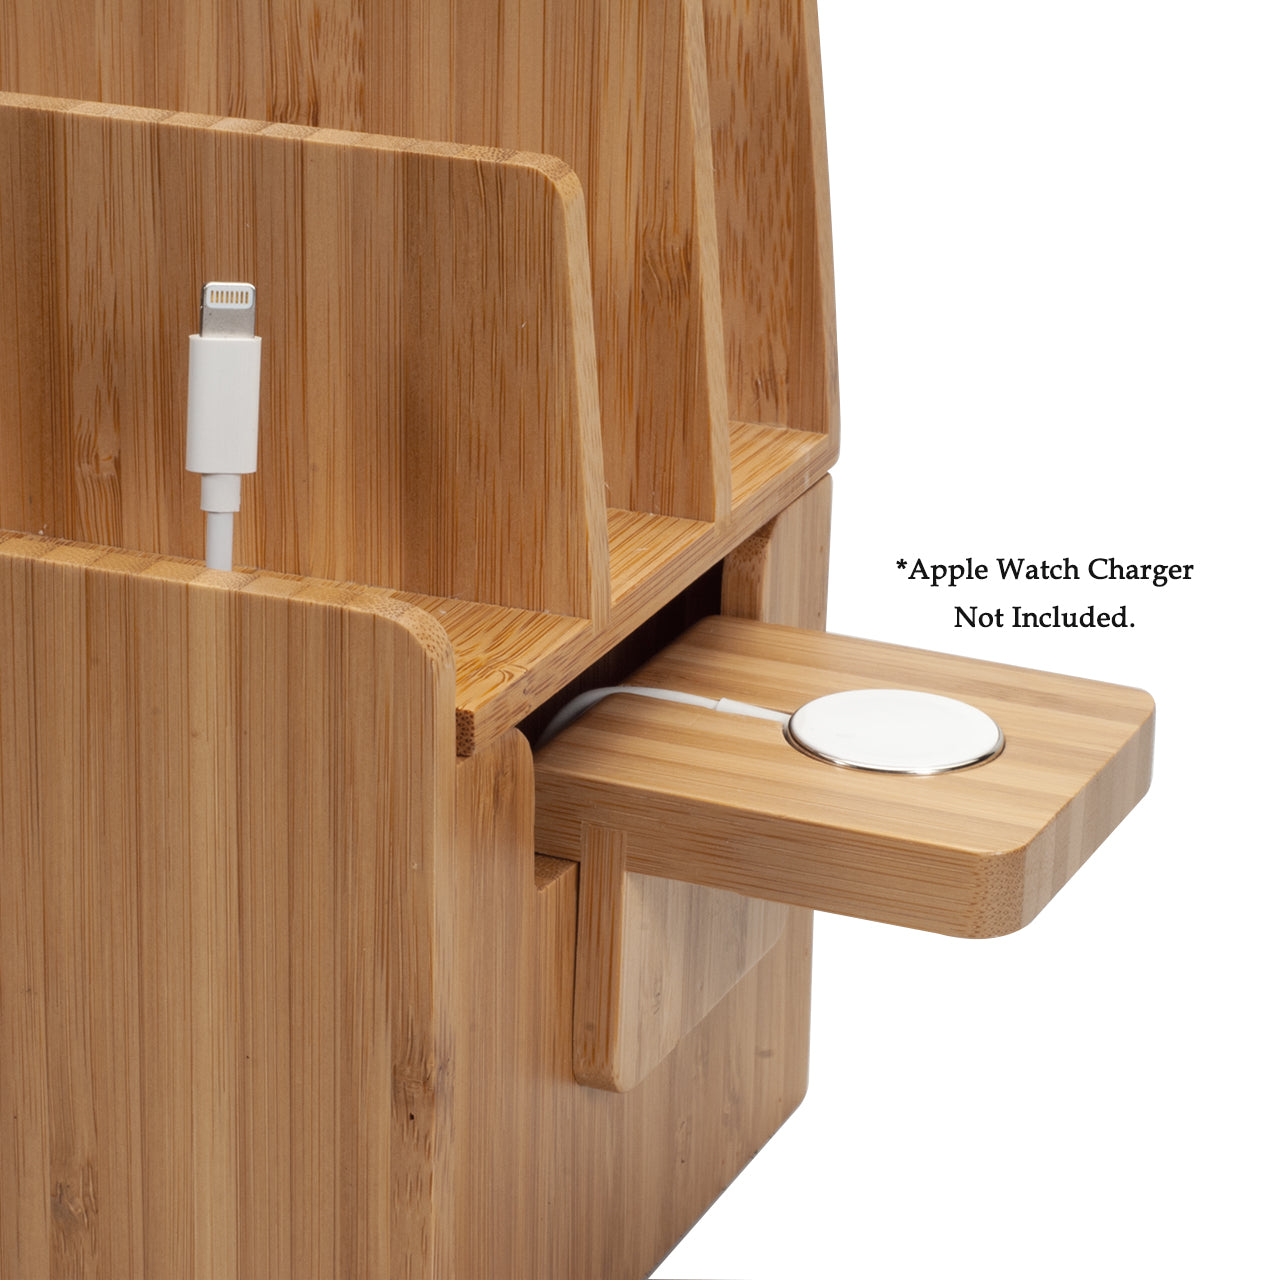 Bamboo Charging Station & Apple Watch Adapter with MFI Cable